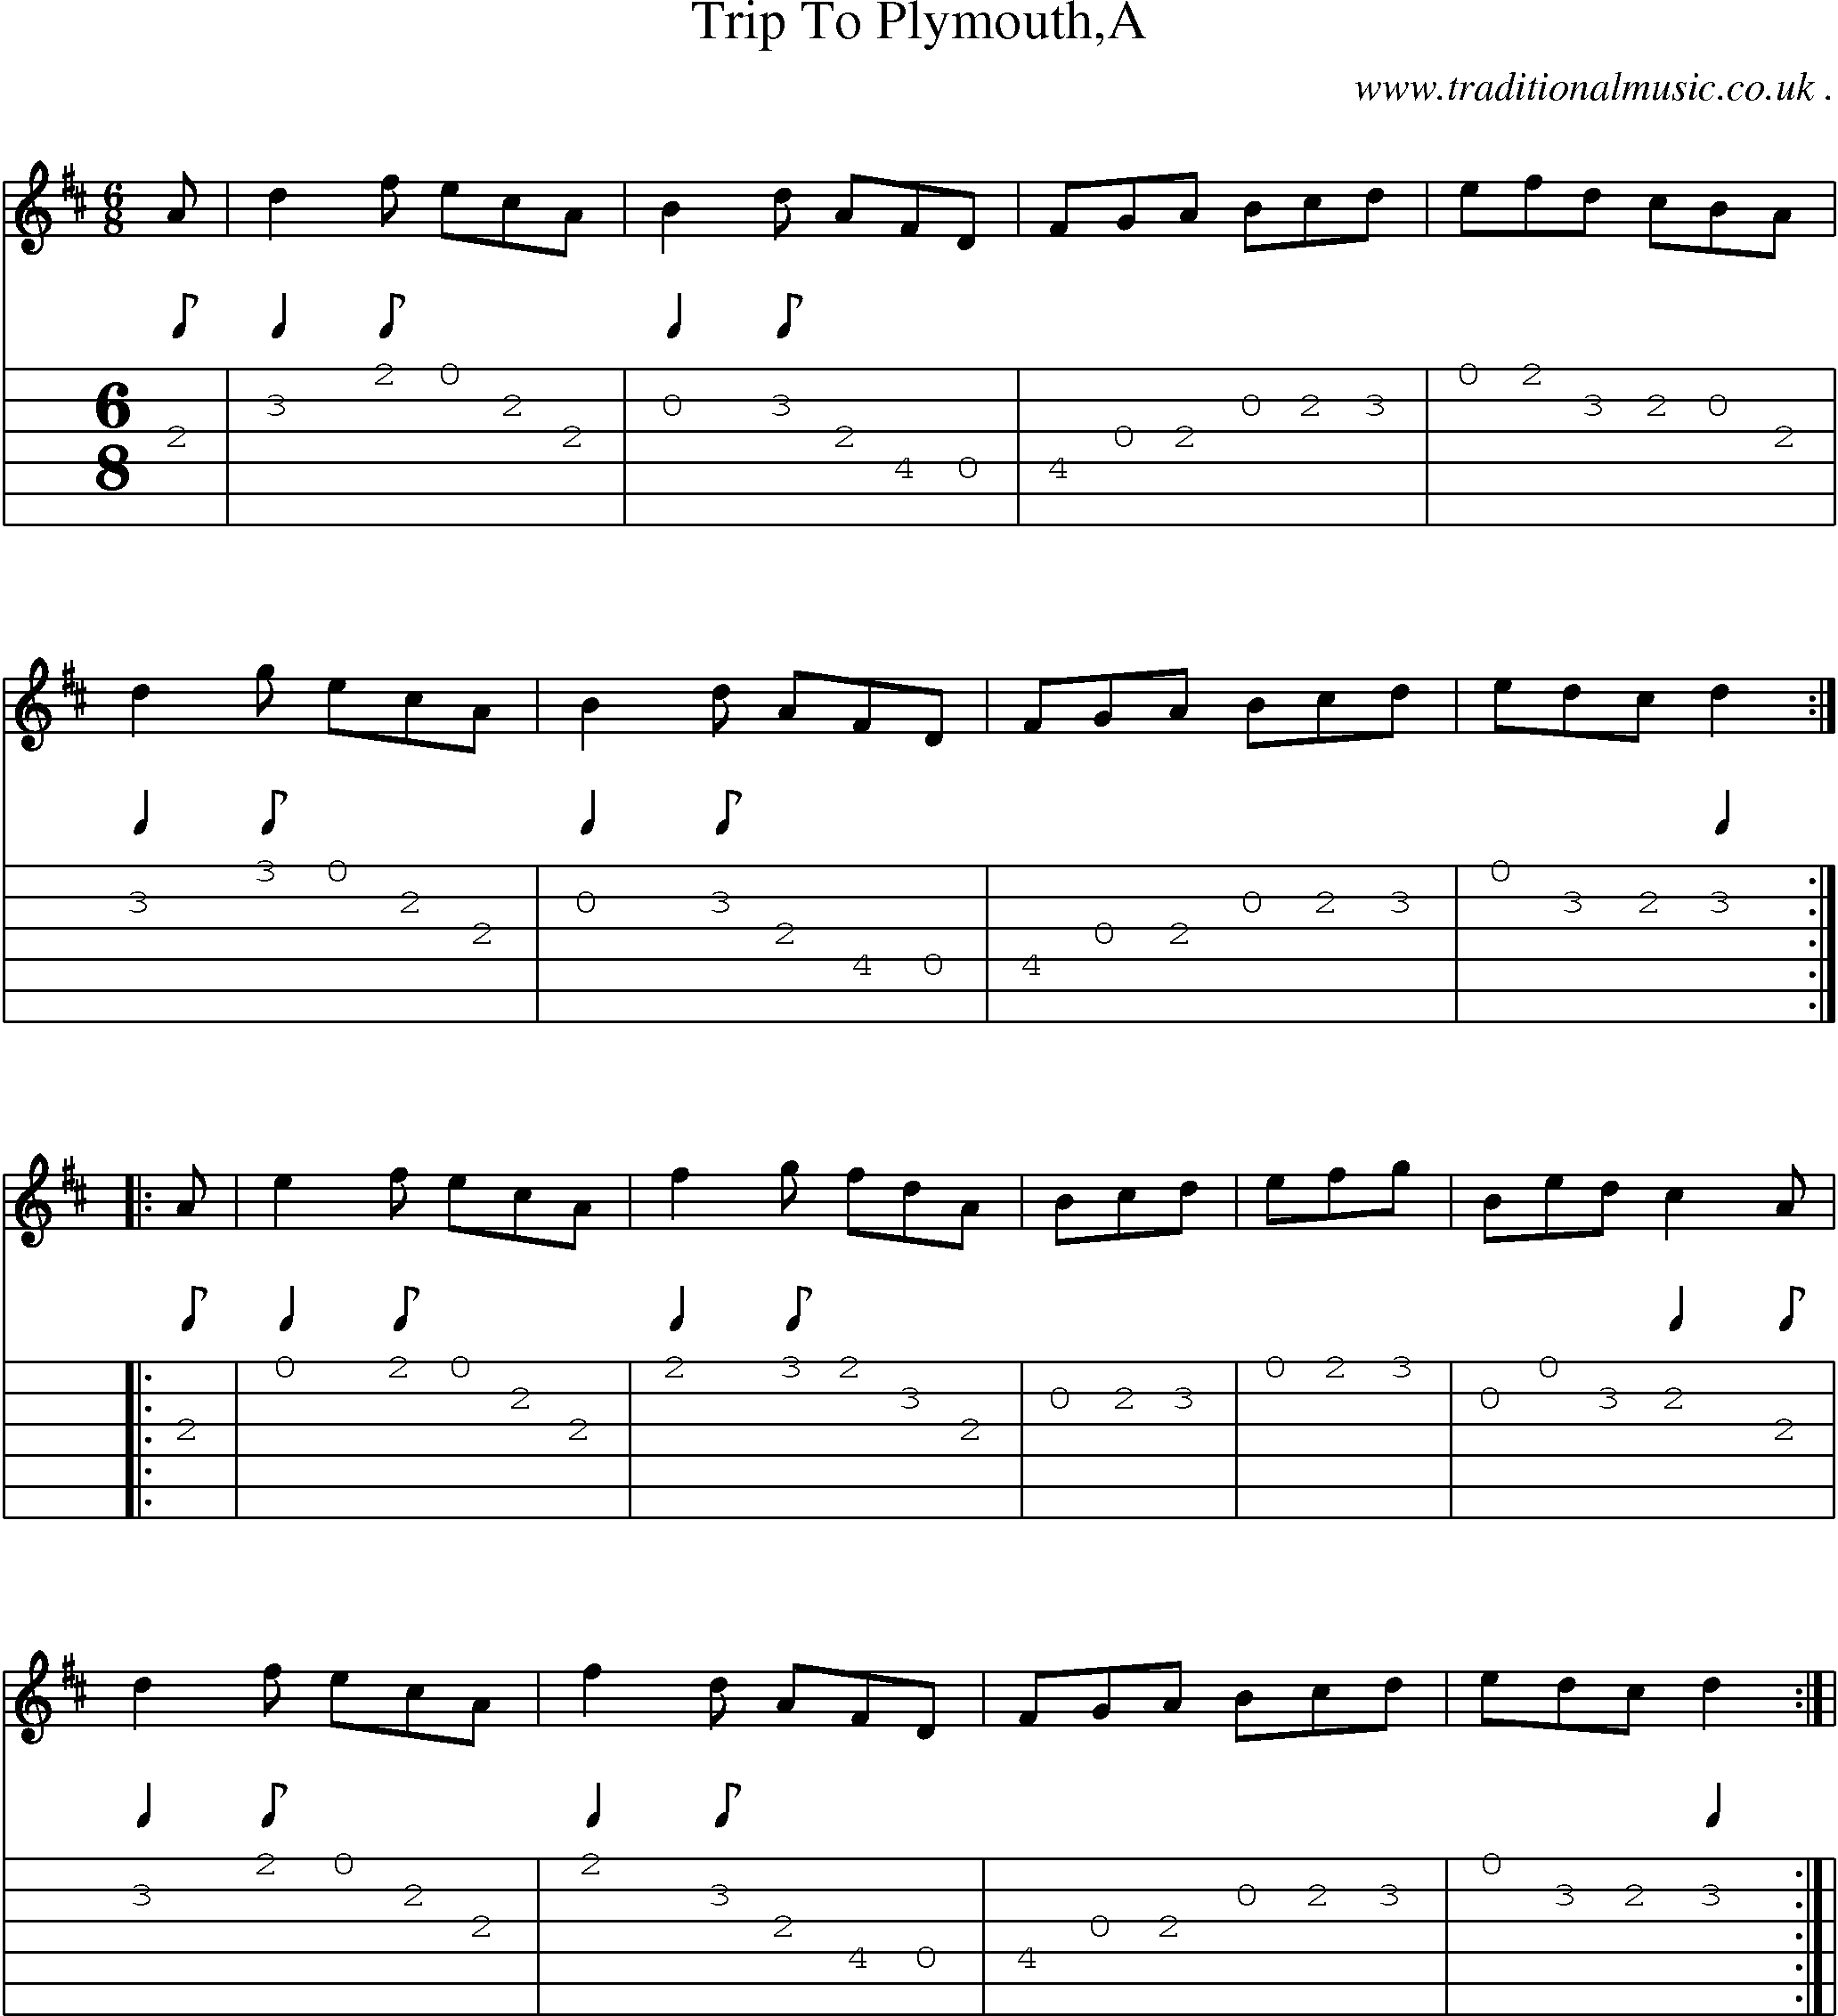 Sheet-Music and Guitar Tabs for Trip To Plymoutha